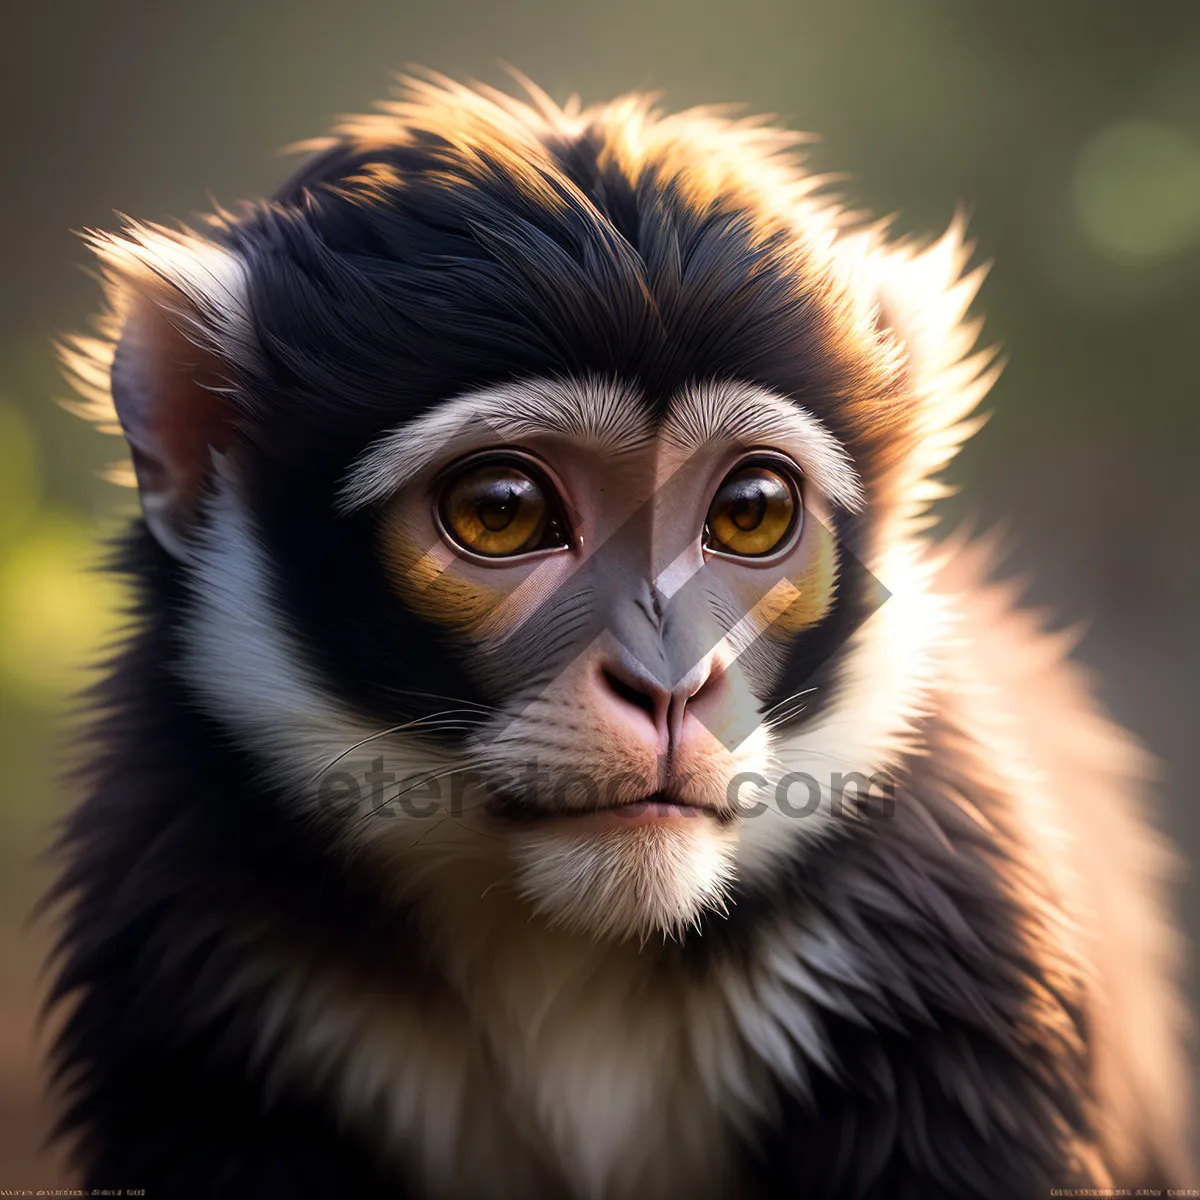 Picture of Cute Primate with Expressive Eyes: Wild Monkey Portrait